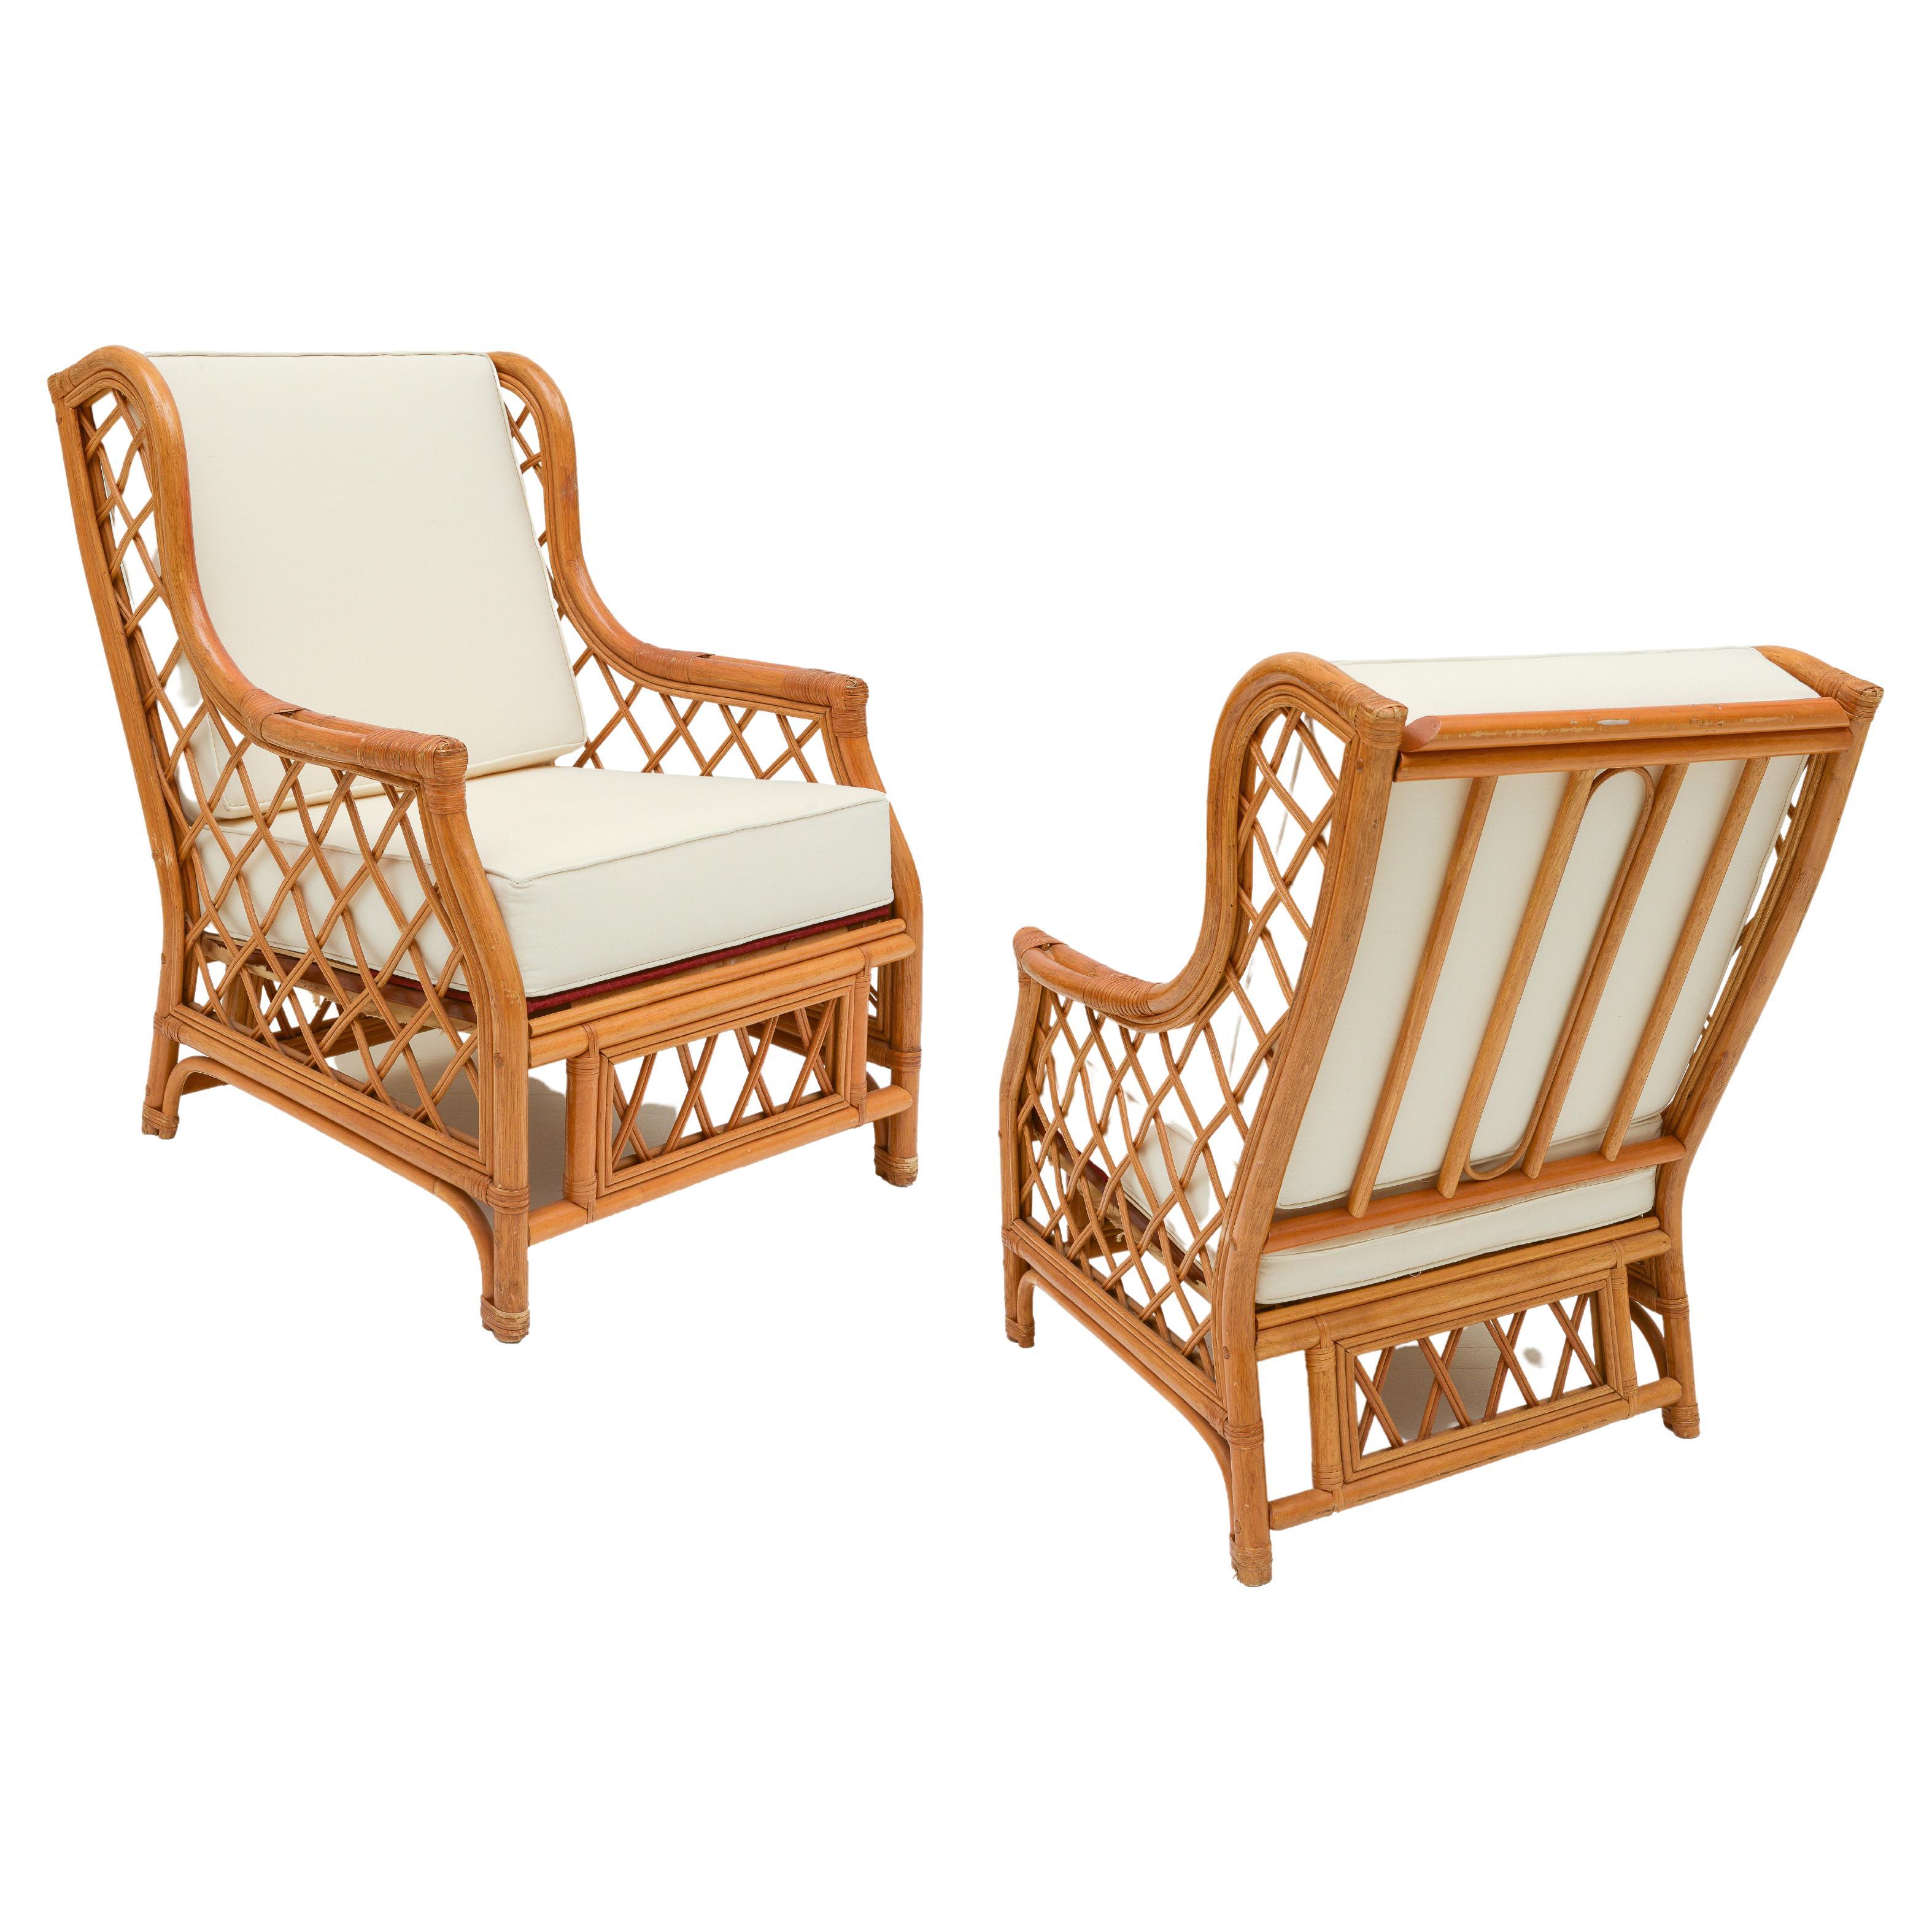 Bamboo Rattan Pair of Vintage Club Chairs, with White Cushions, 1970's, France For Sale